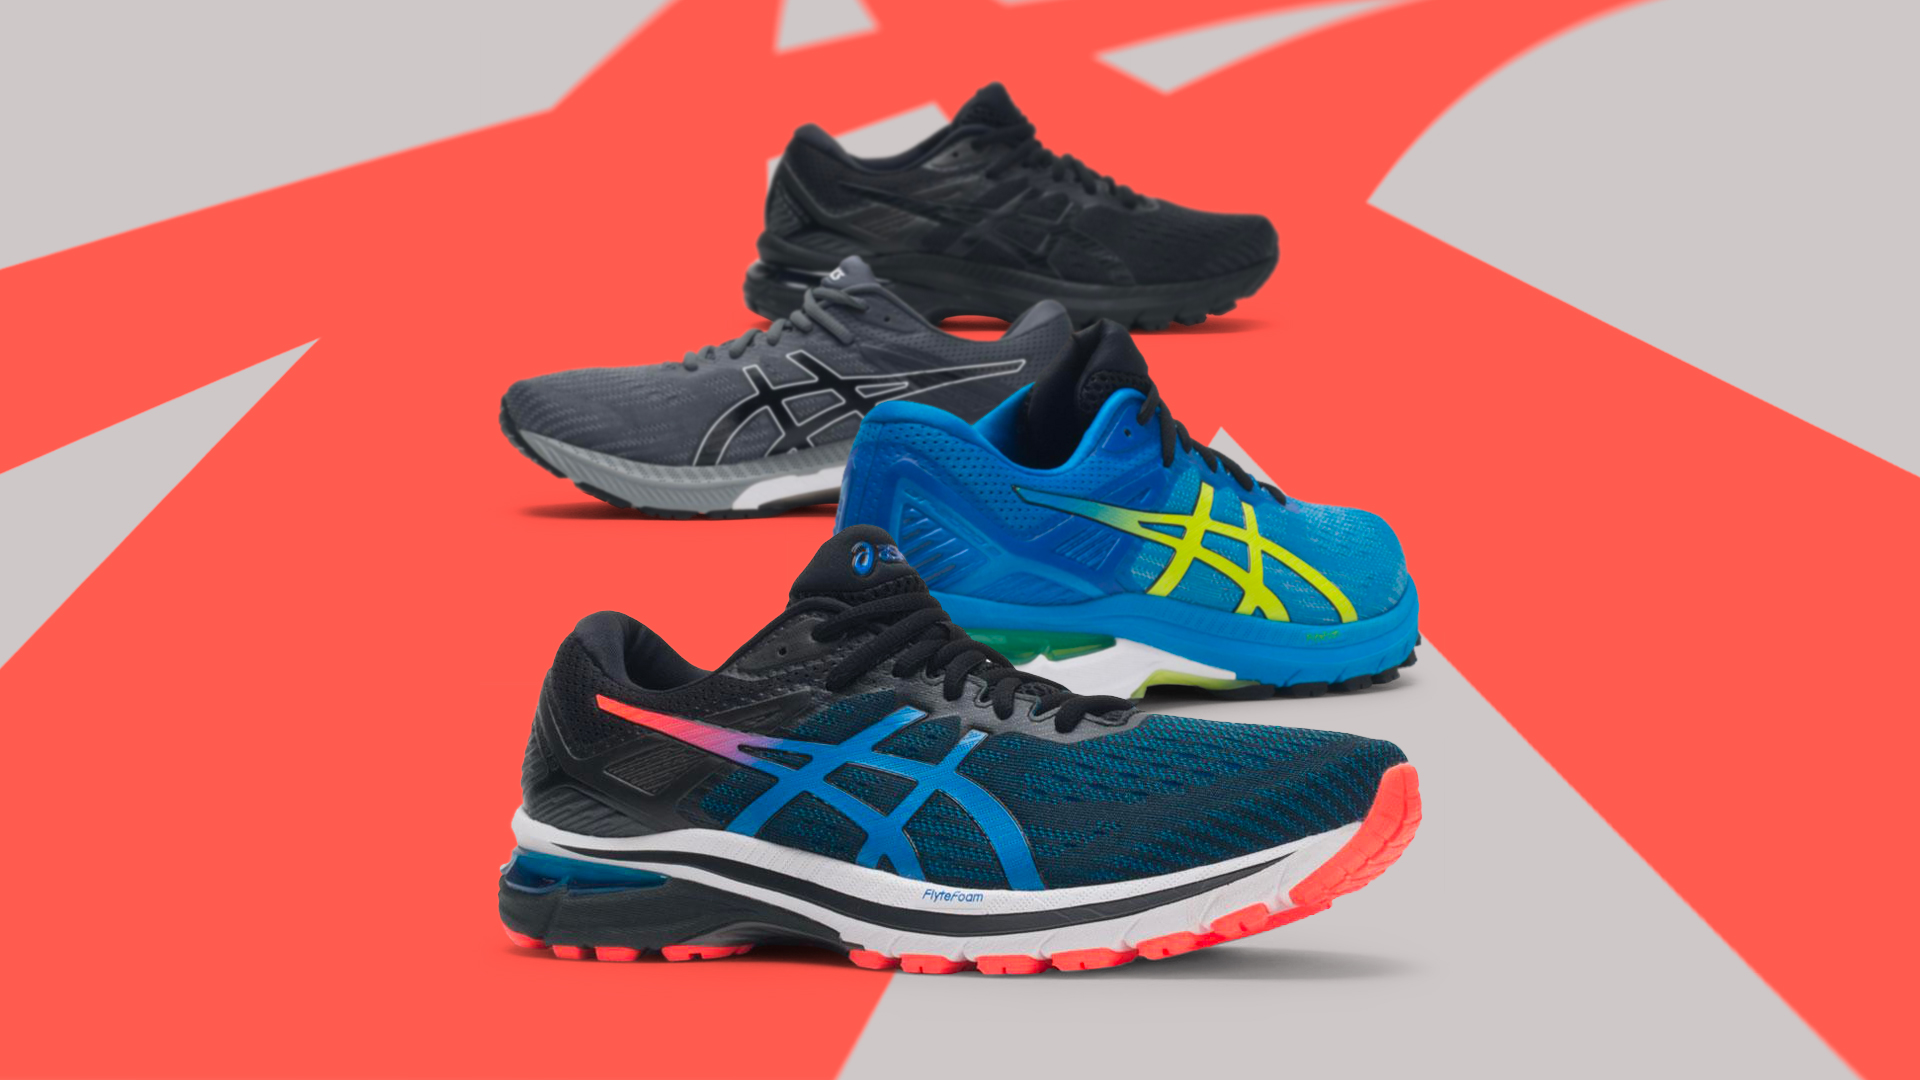 Asics Back With One Of The Most Reliable Running Shoes Of 2020 | Style ...